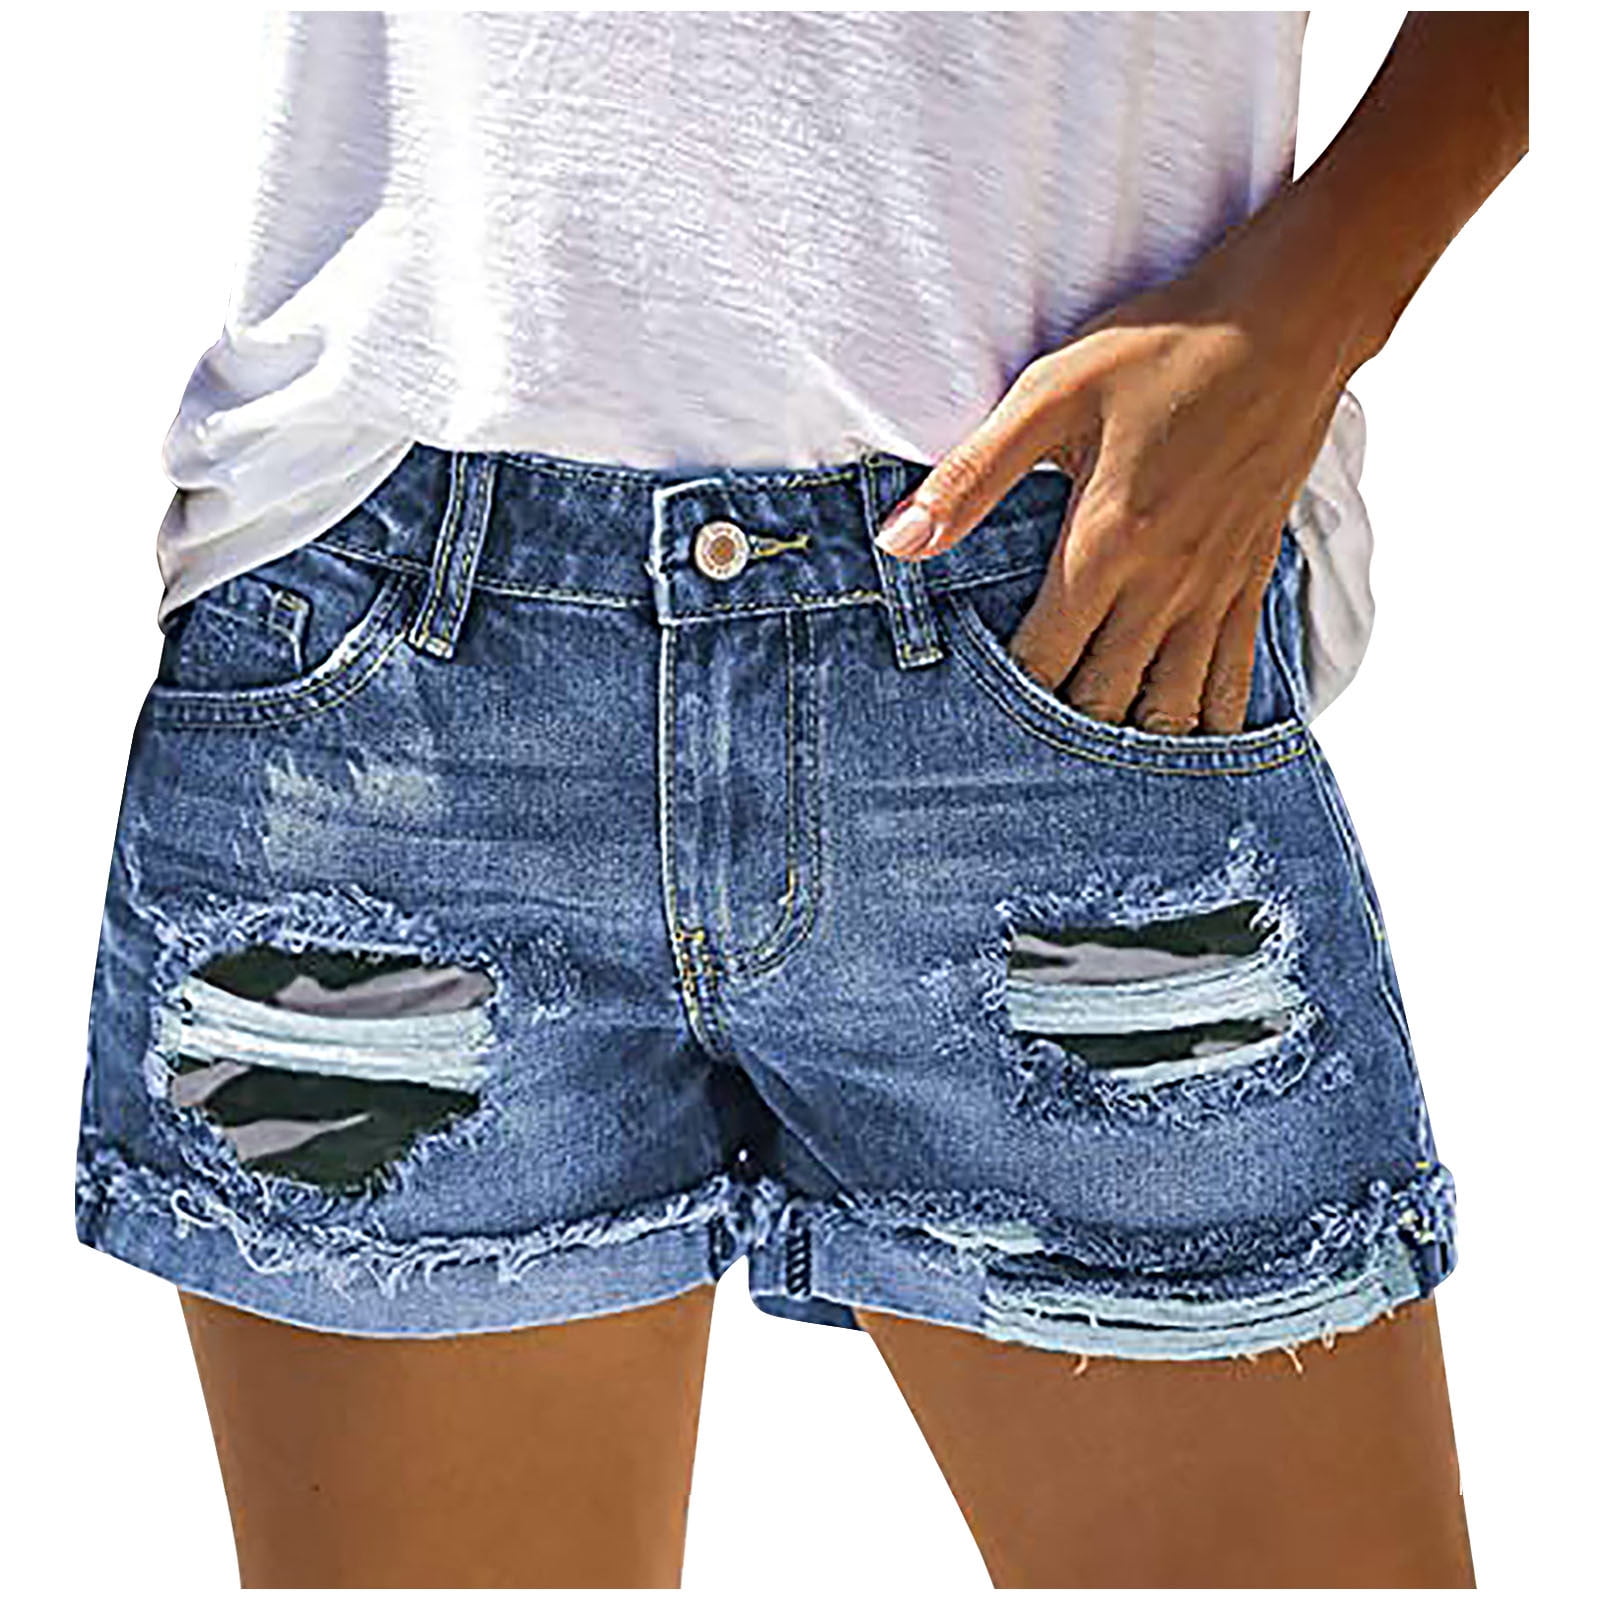 Blue Jean Shorts for Women Summer Cute Mid Rise Shorts Ripped Faded ...